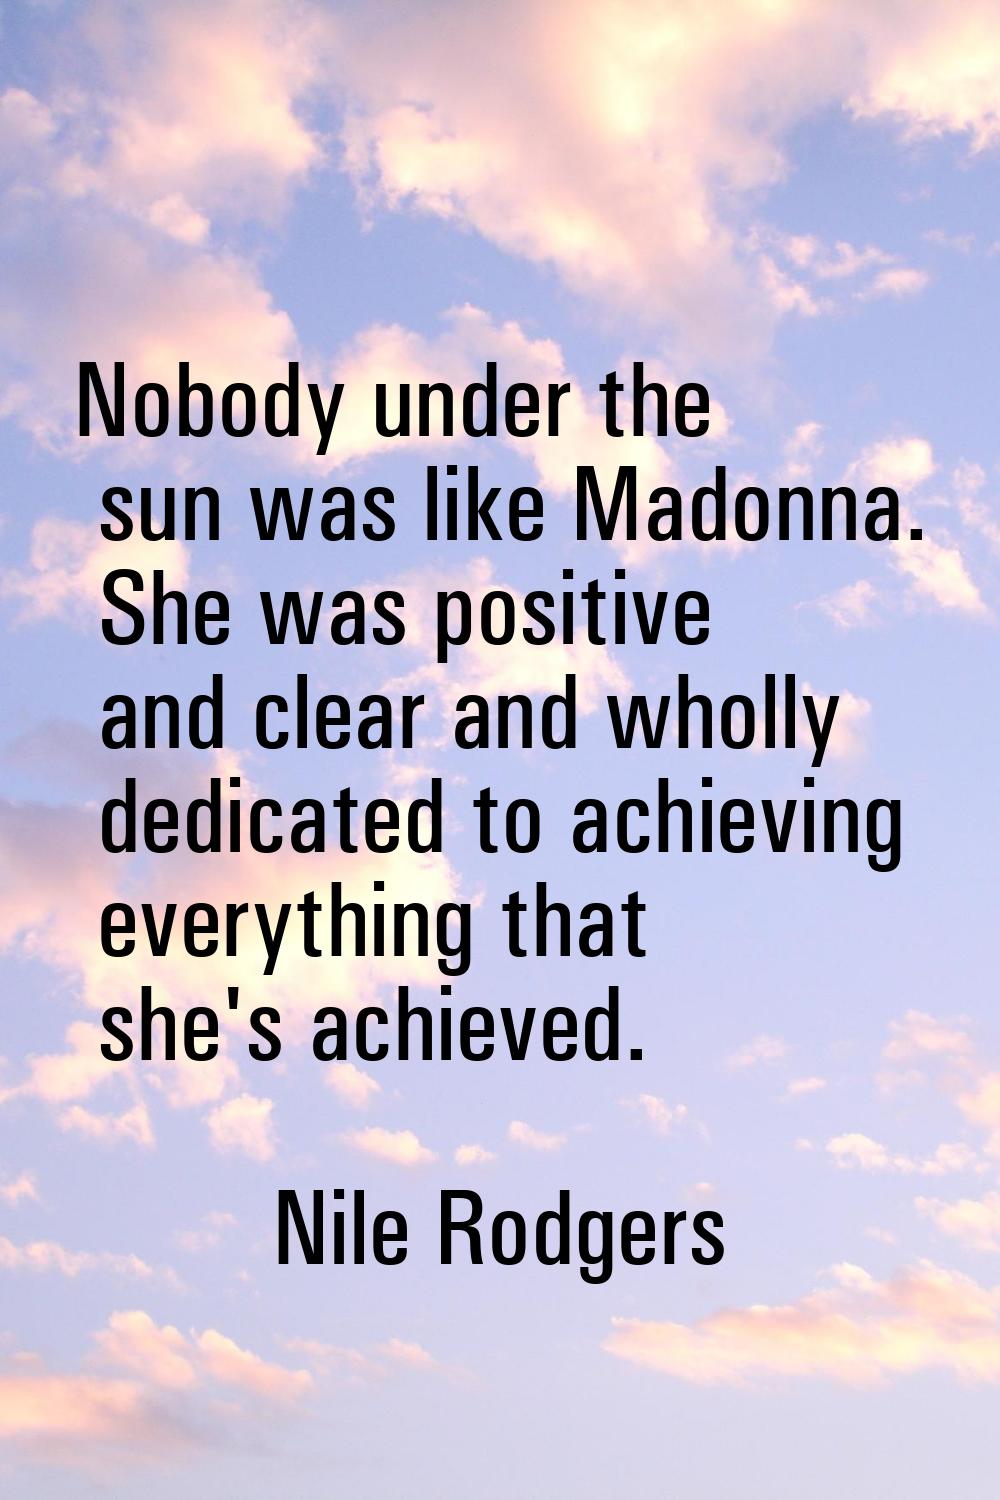 Nobody under the sun was like Madonna. She was positive and clear and wholly dedicated to achieving